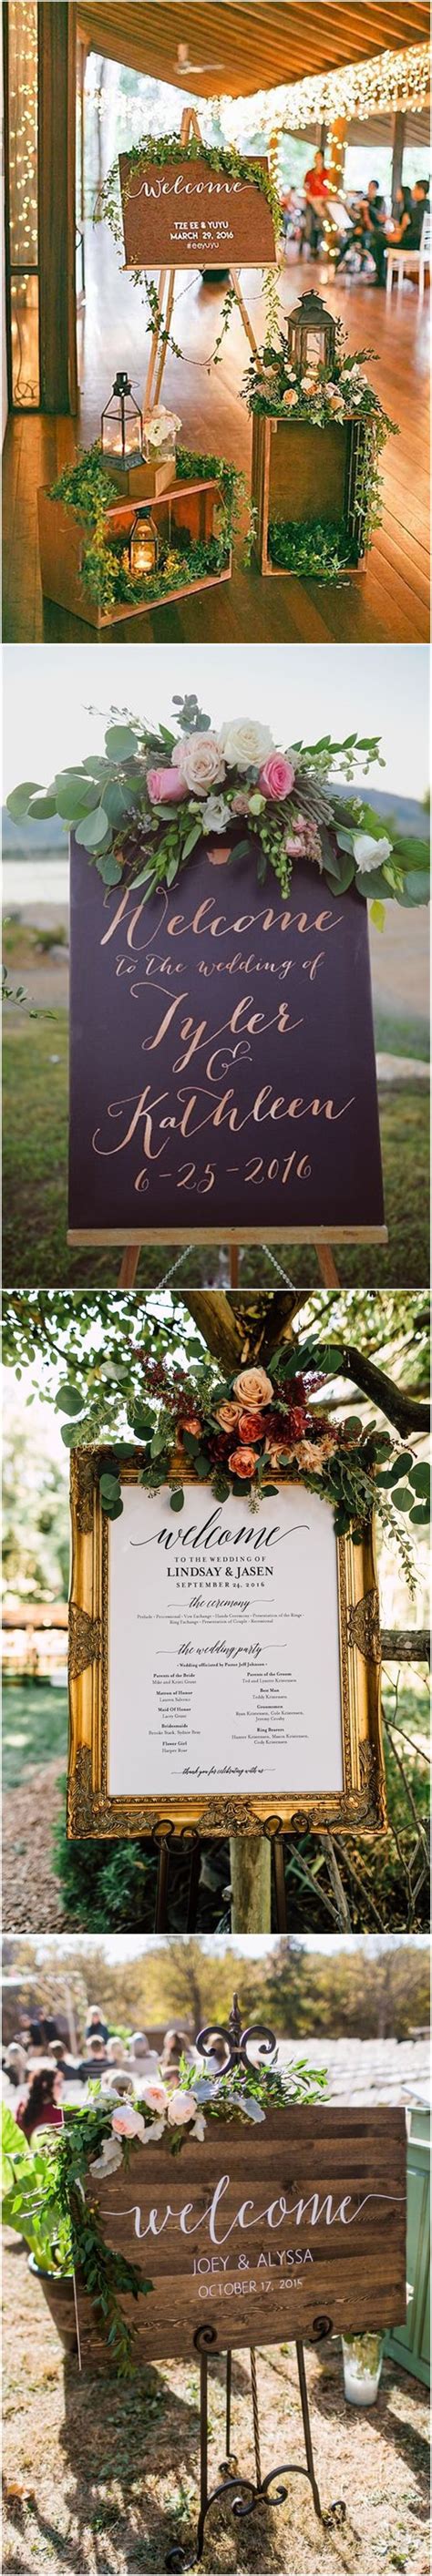 Wedding Signs 25 Awesome Wedding Welcome Signs To Rock Wedding Time